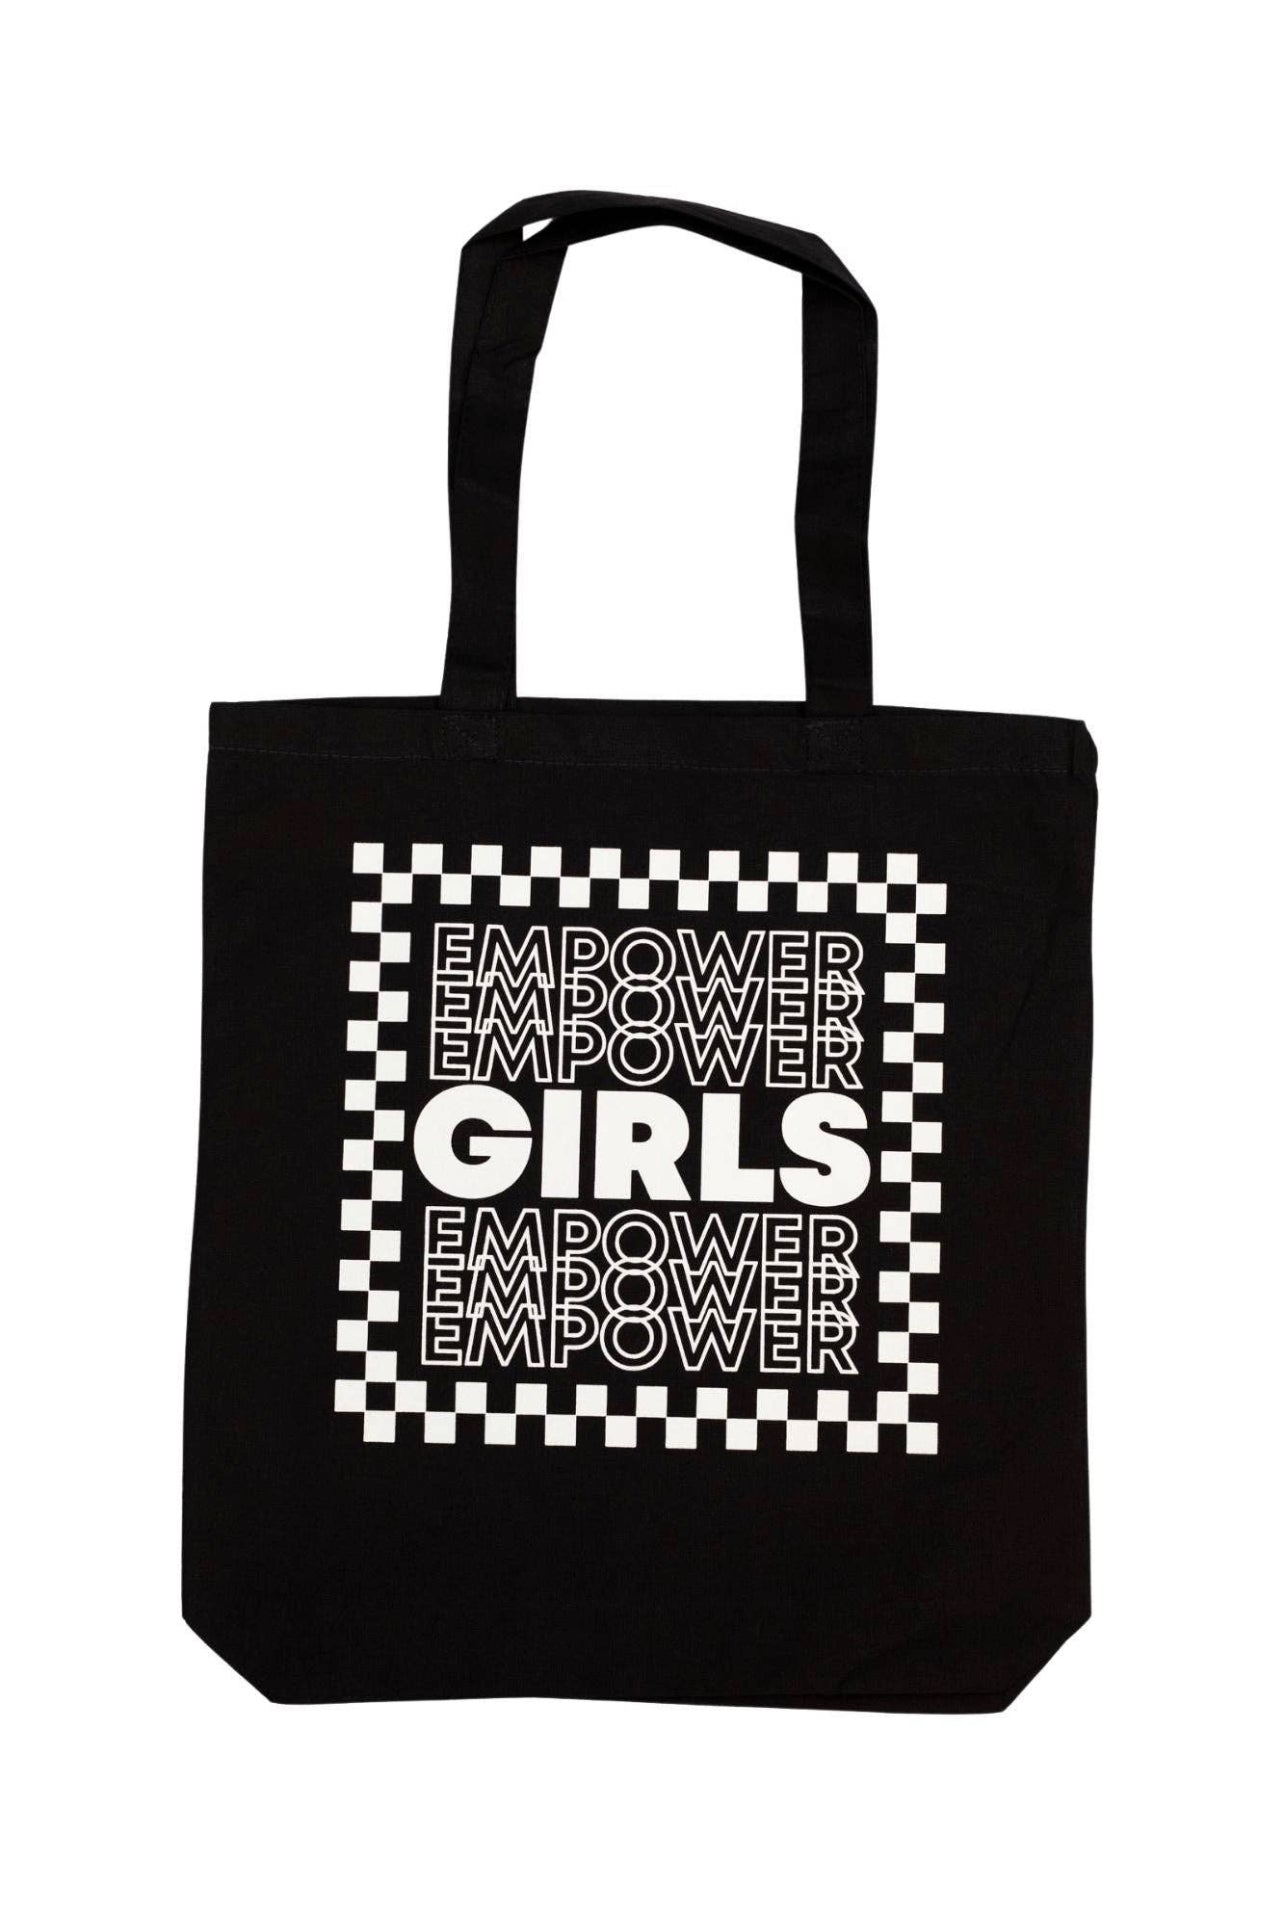 Empower Girls Reusable Shopping Tote